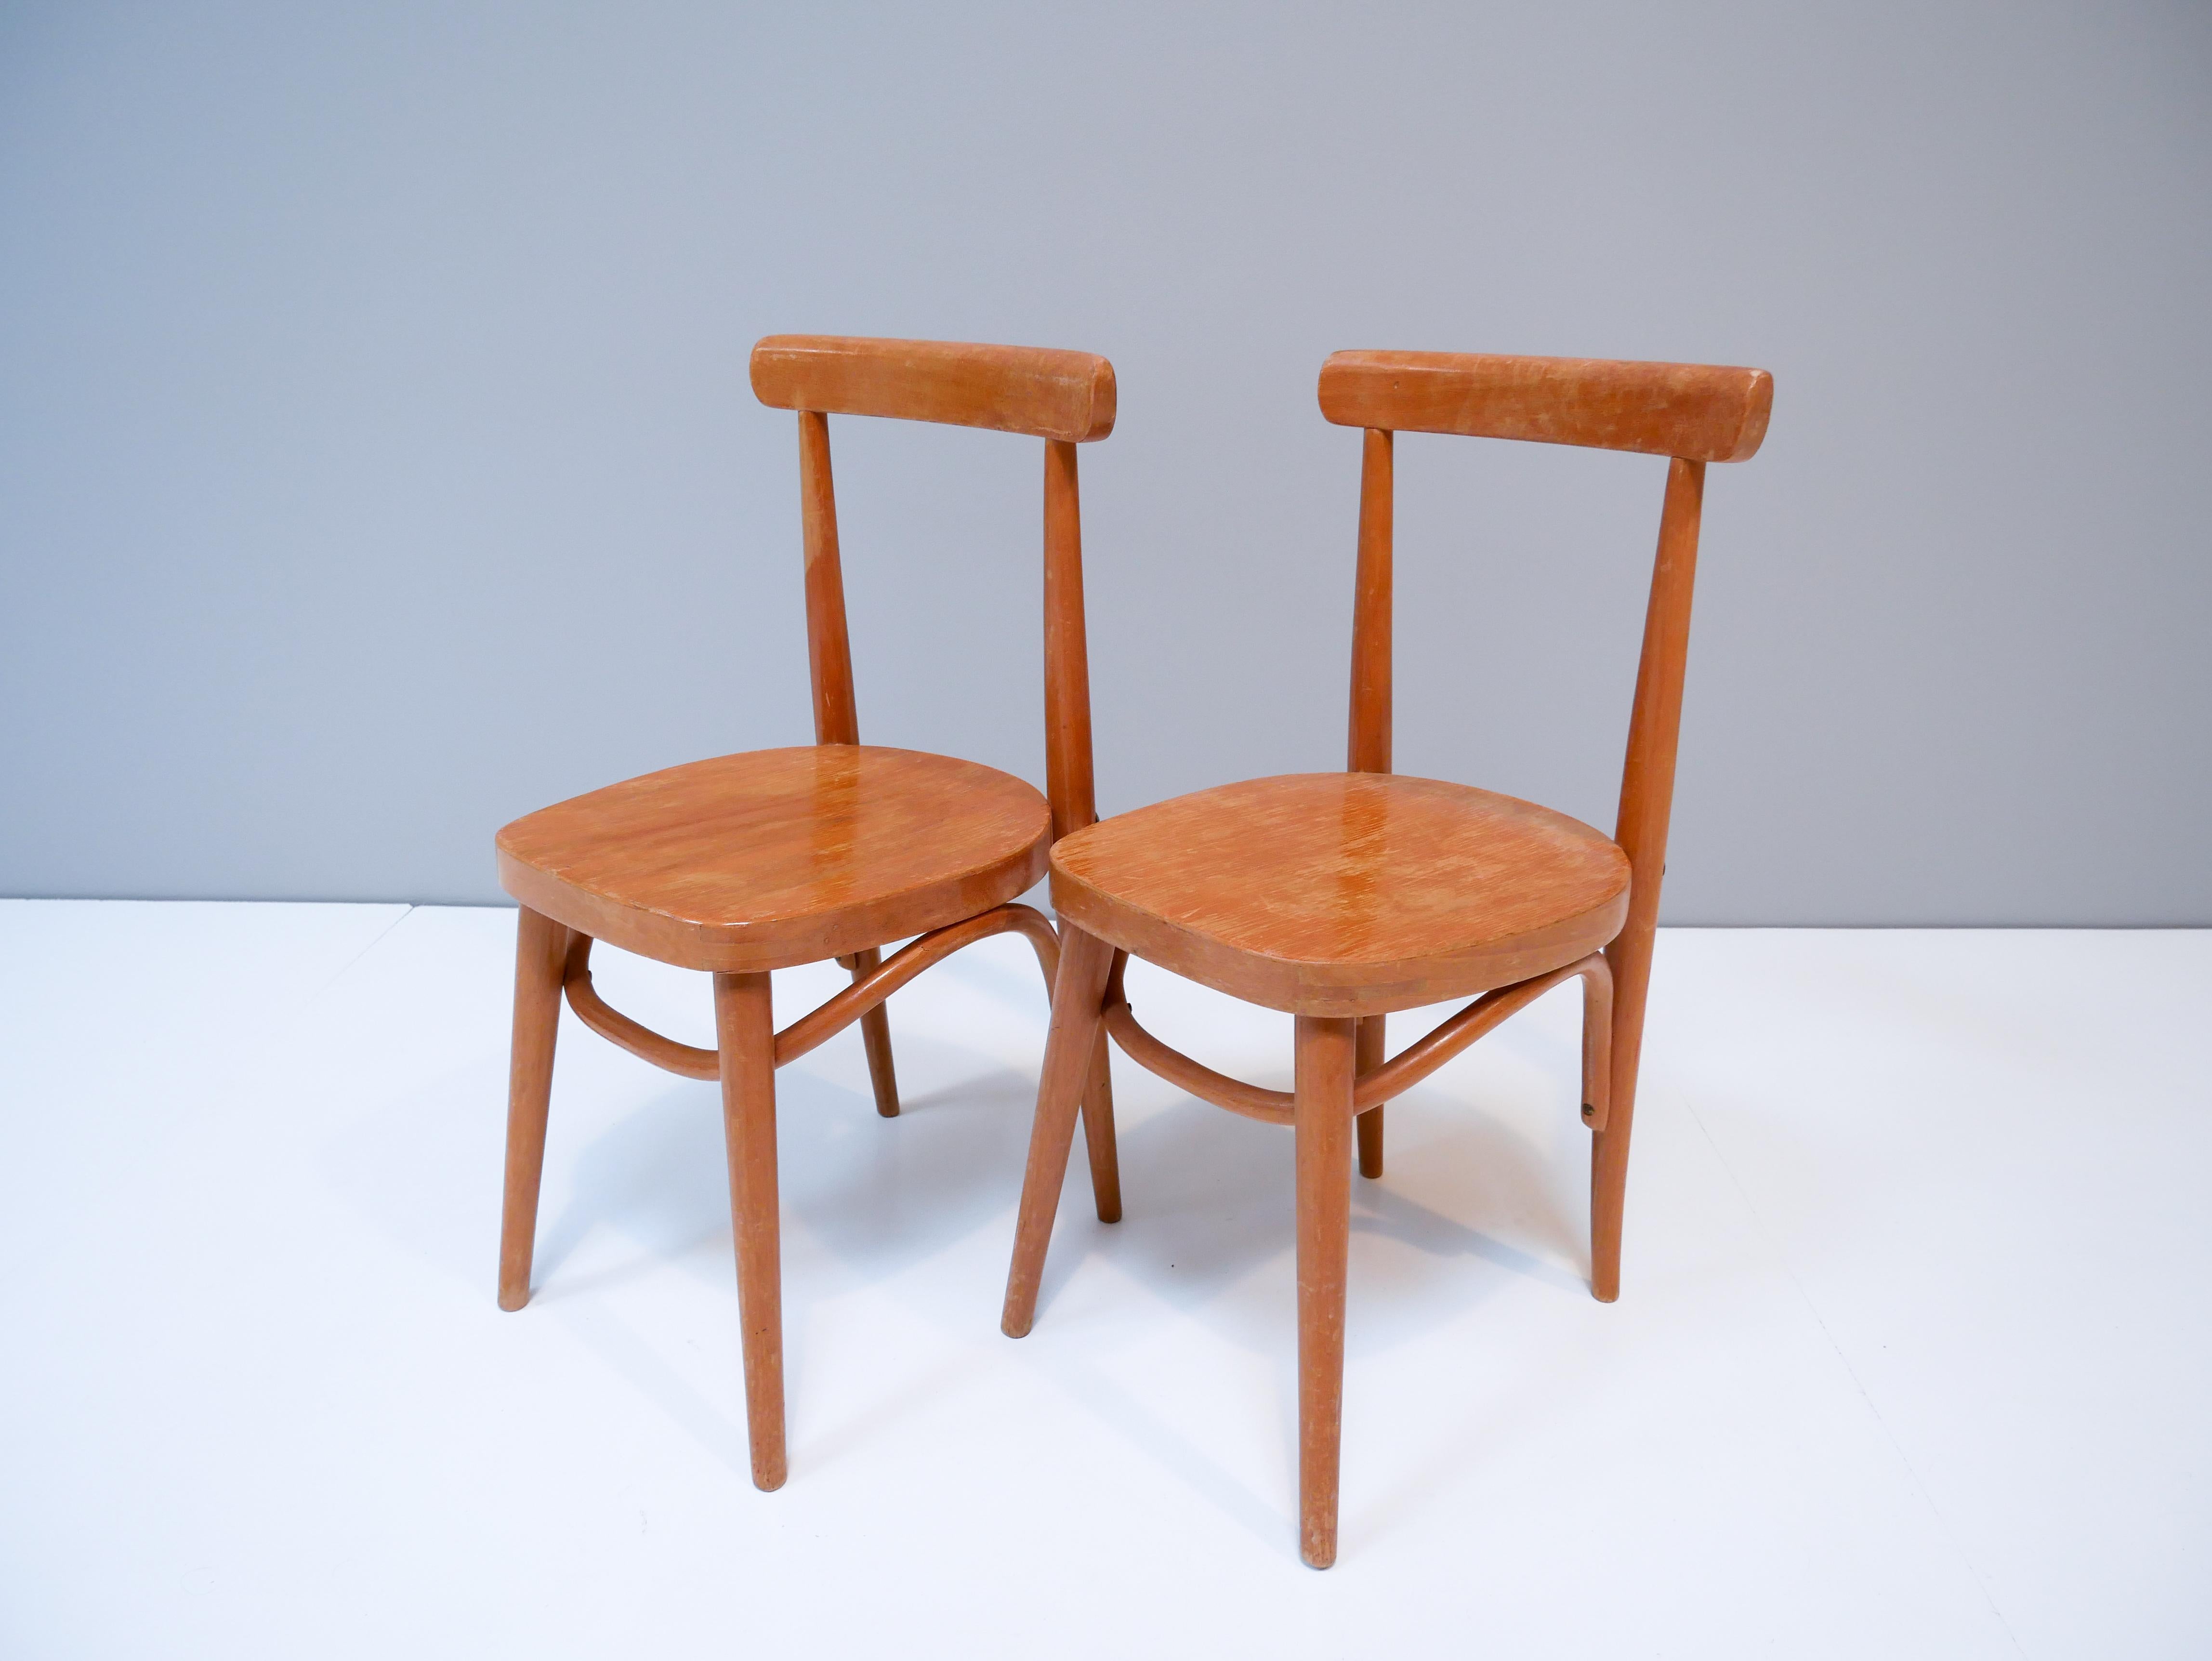 Thonet style children's bentwood chairs 1950s Sweden.